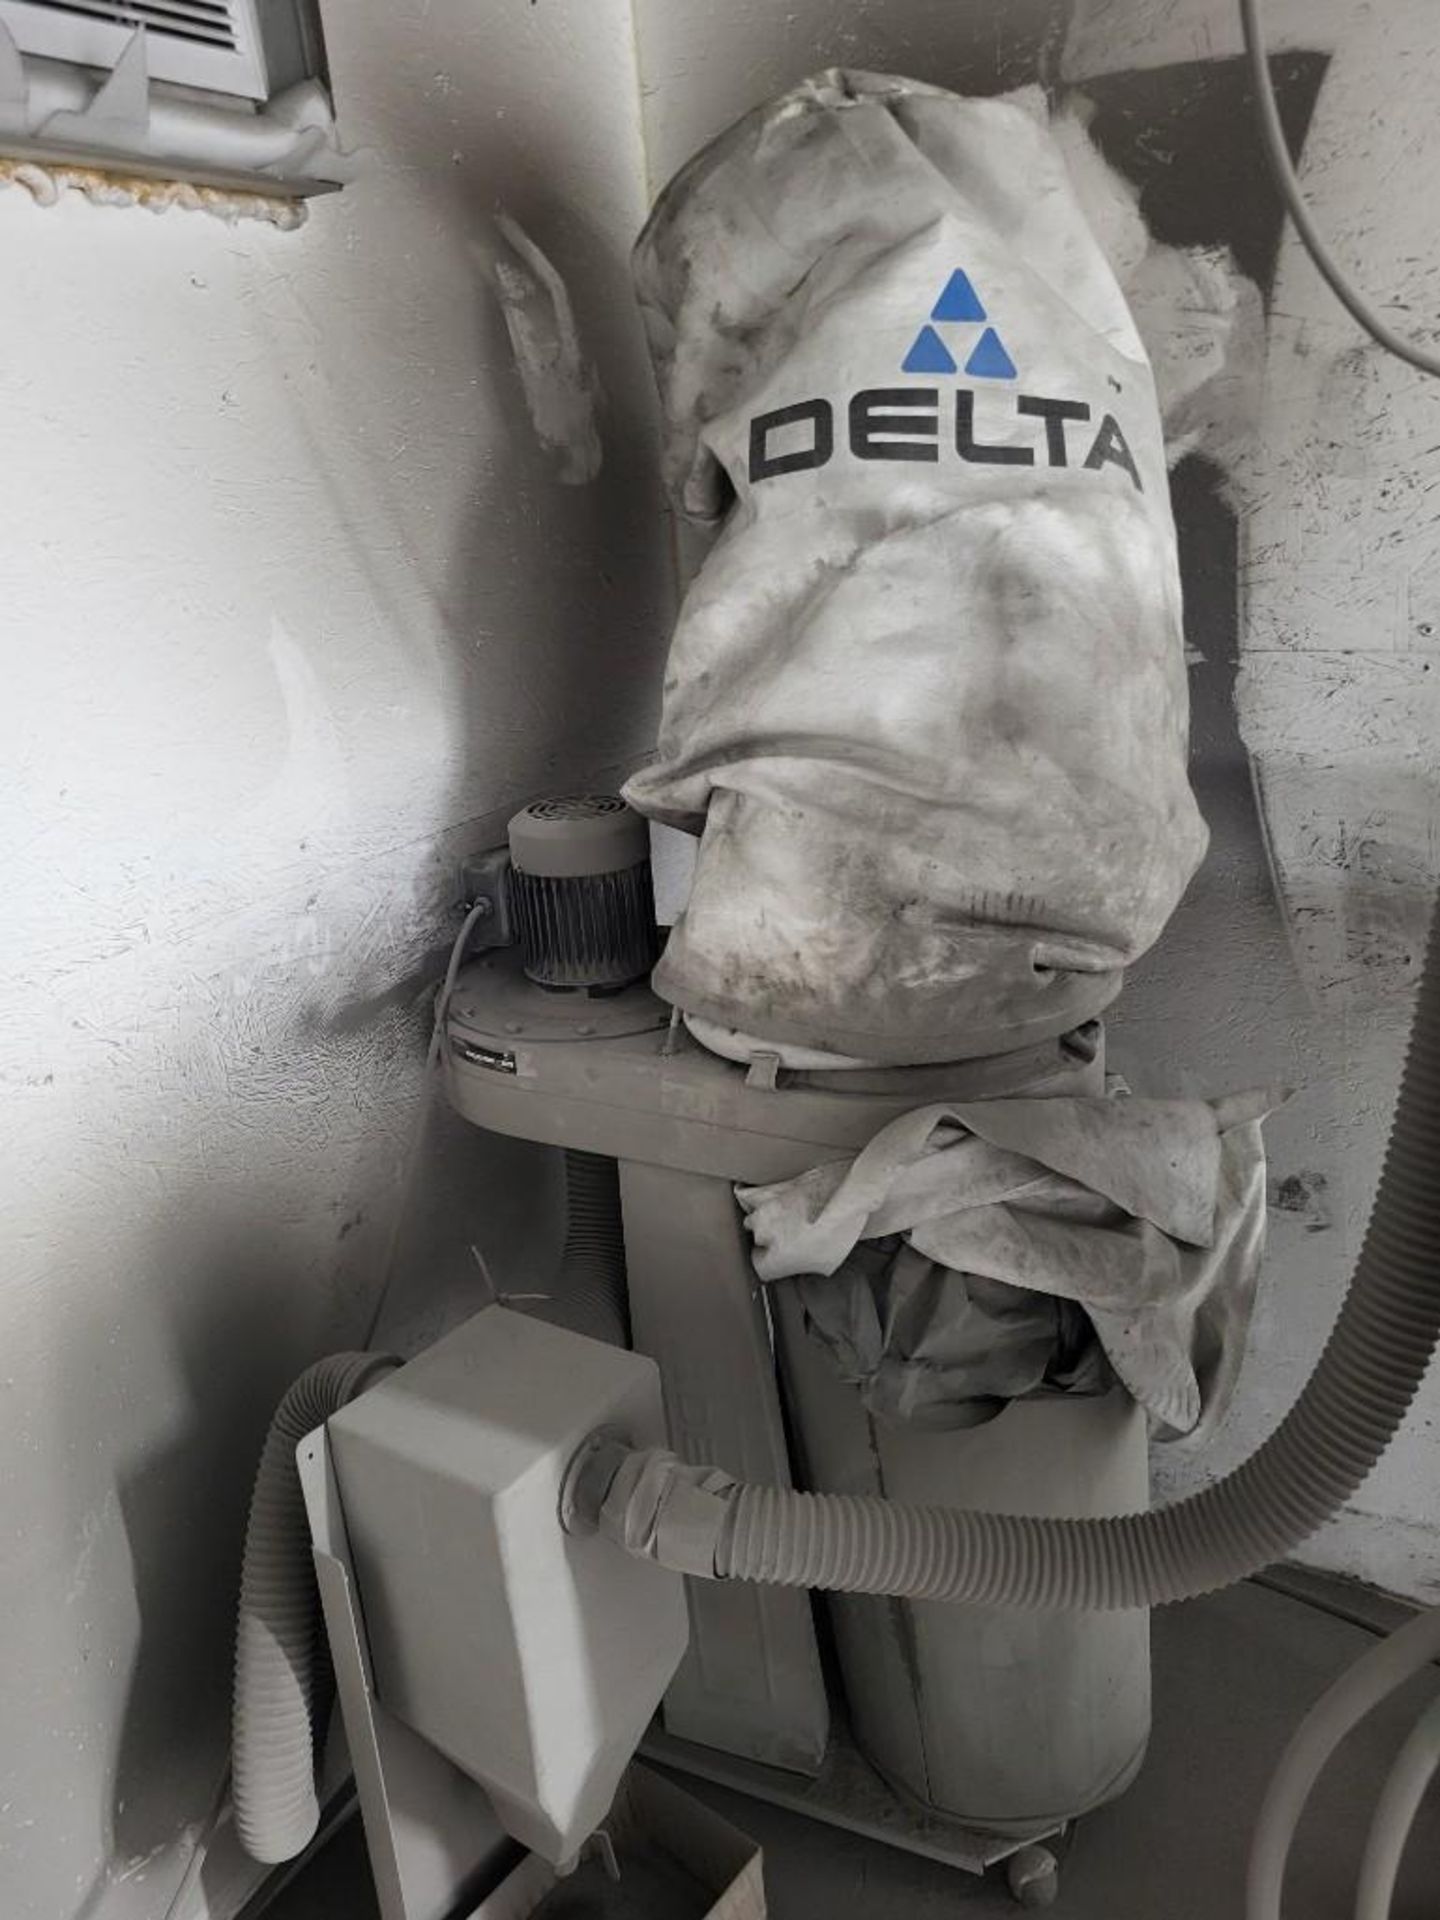 DELTA SHOPMASTER DUST COLLECTOR AP400 WITH BLAST CABINET - Image 6 of 7